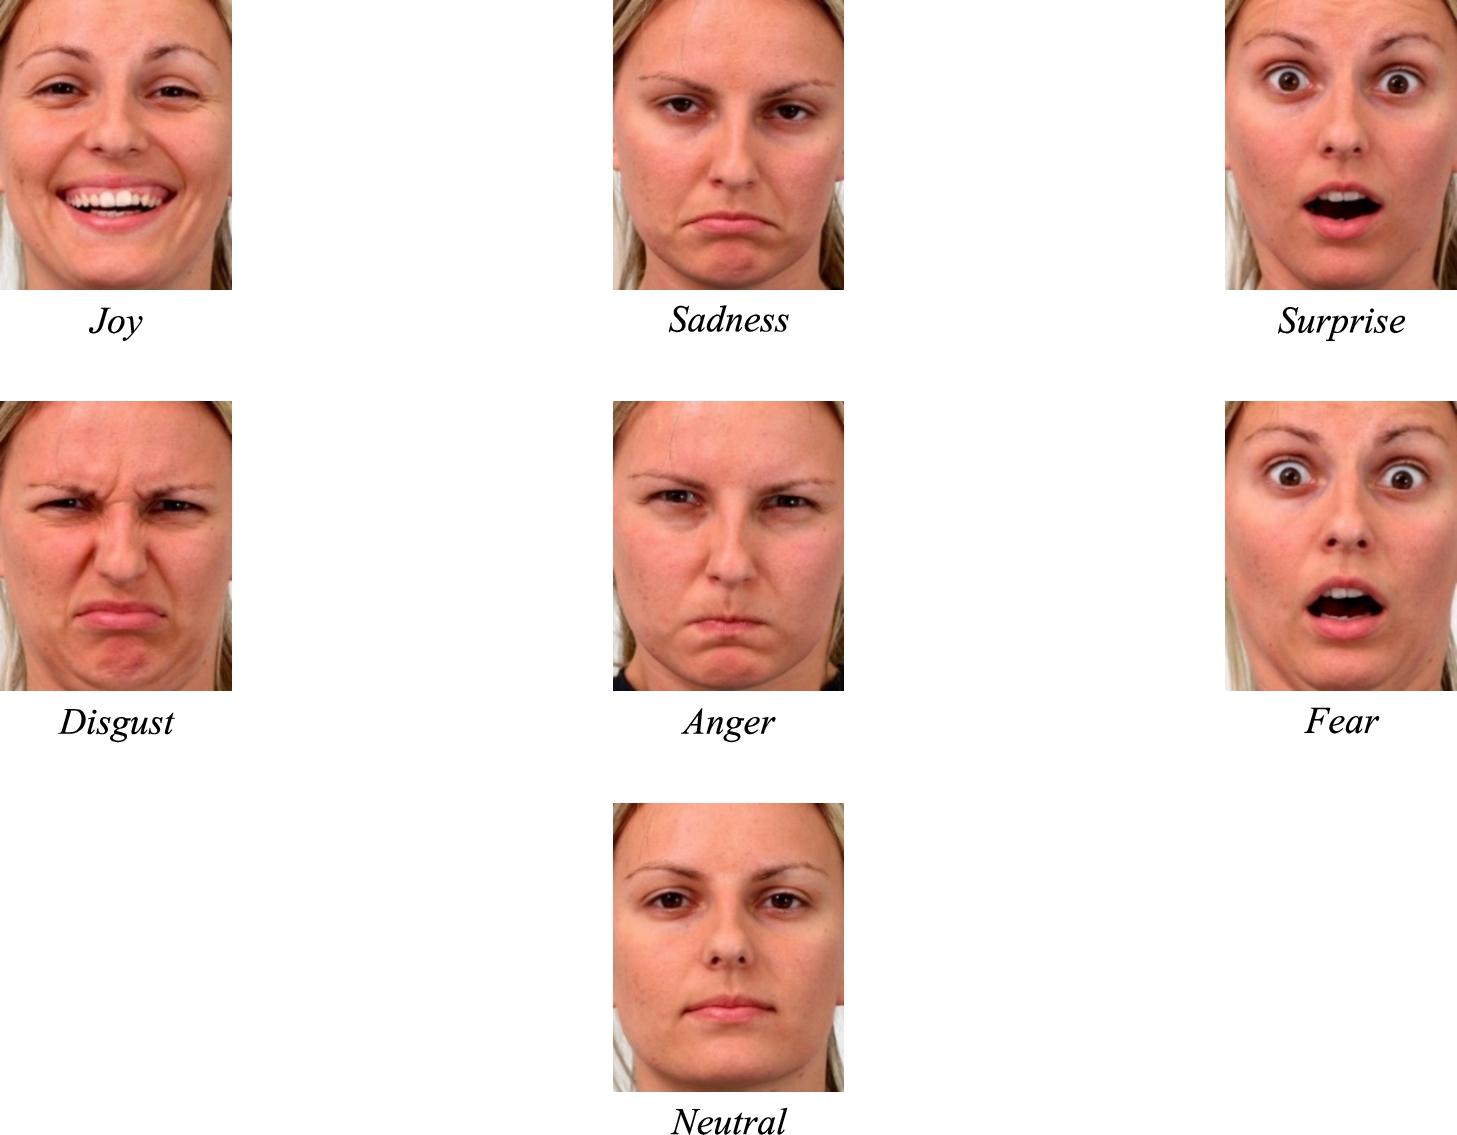 Examples of each basic emotion displayed by one woman (cropped and resized pictures).